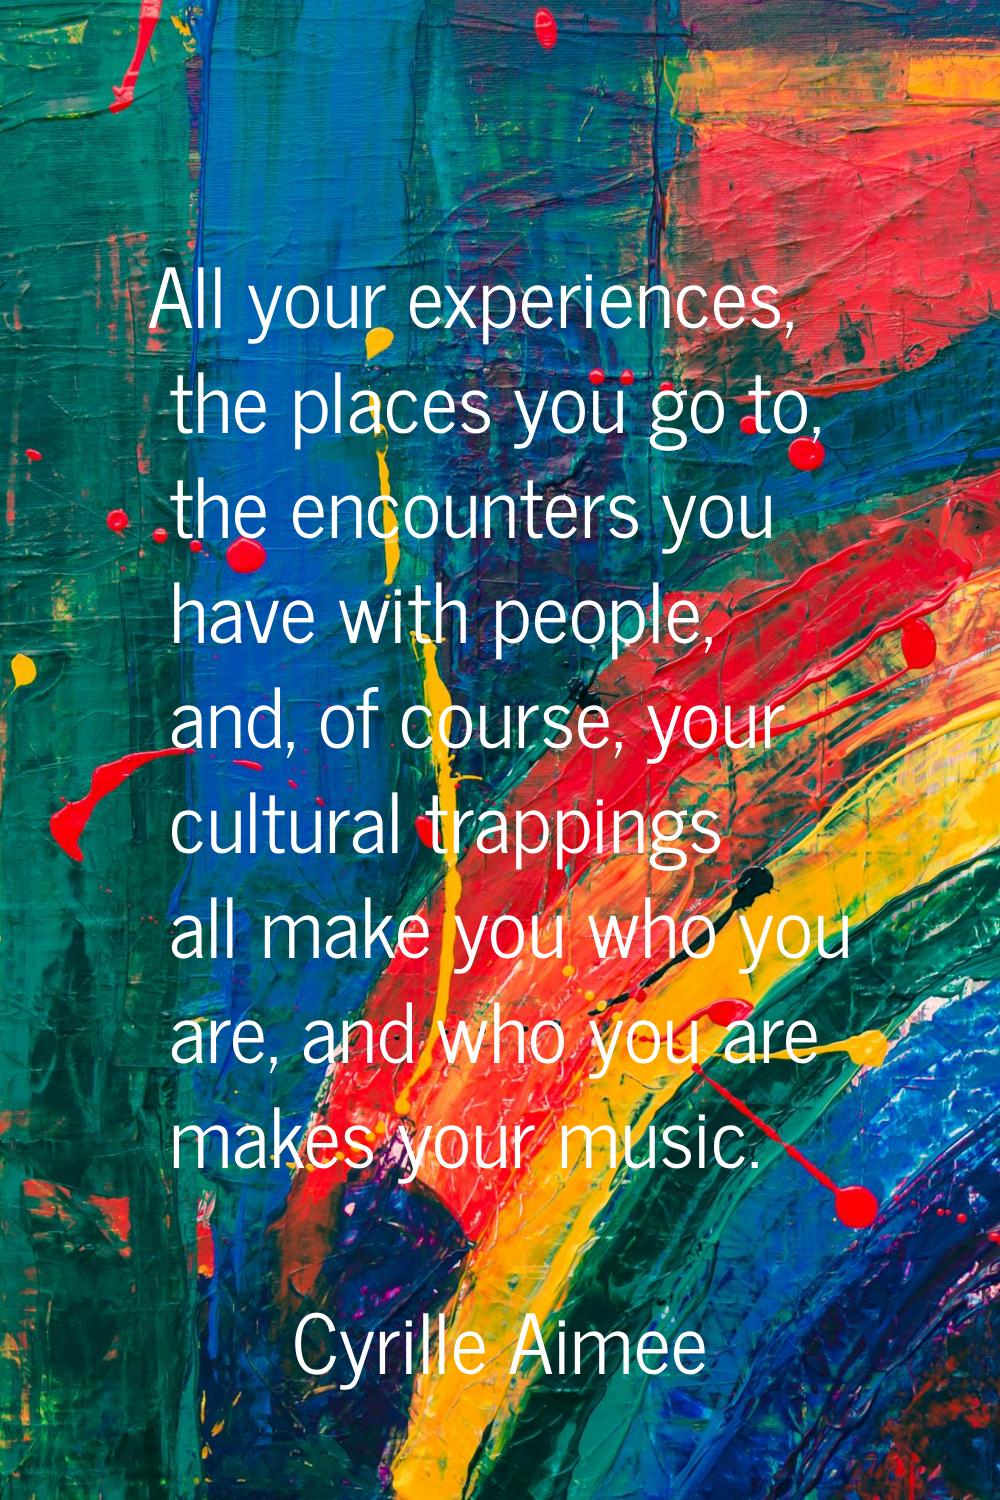 All your experiences, the places you go to, the encounters you have with people, and, of course, yo